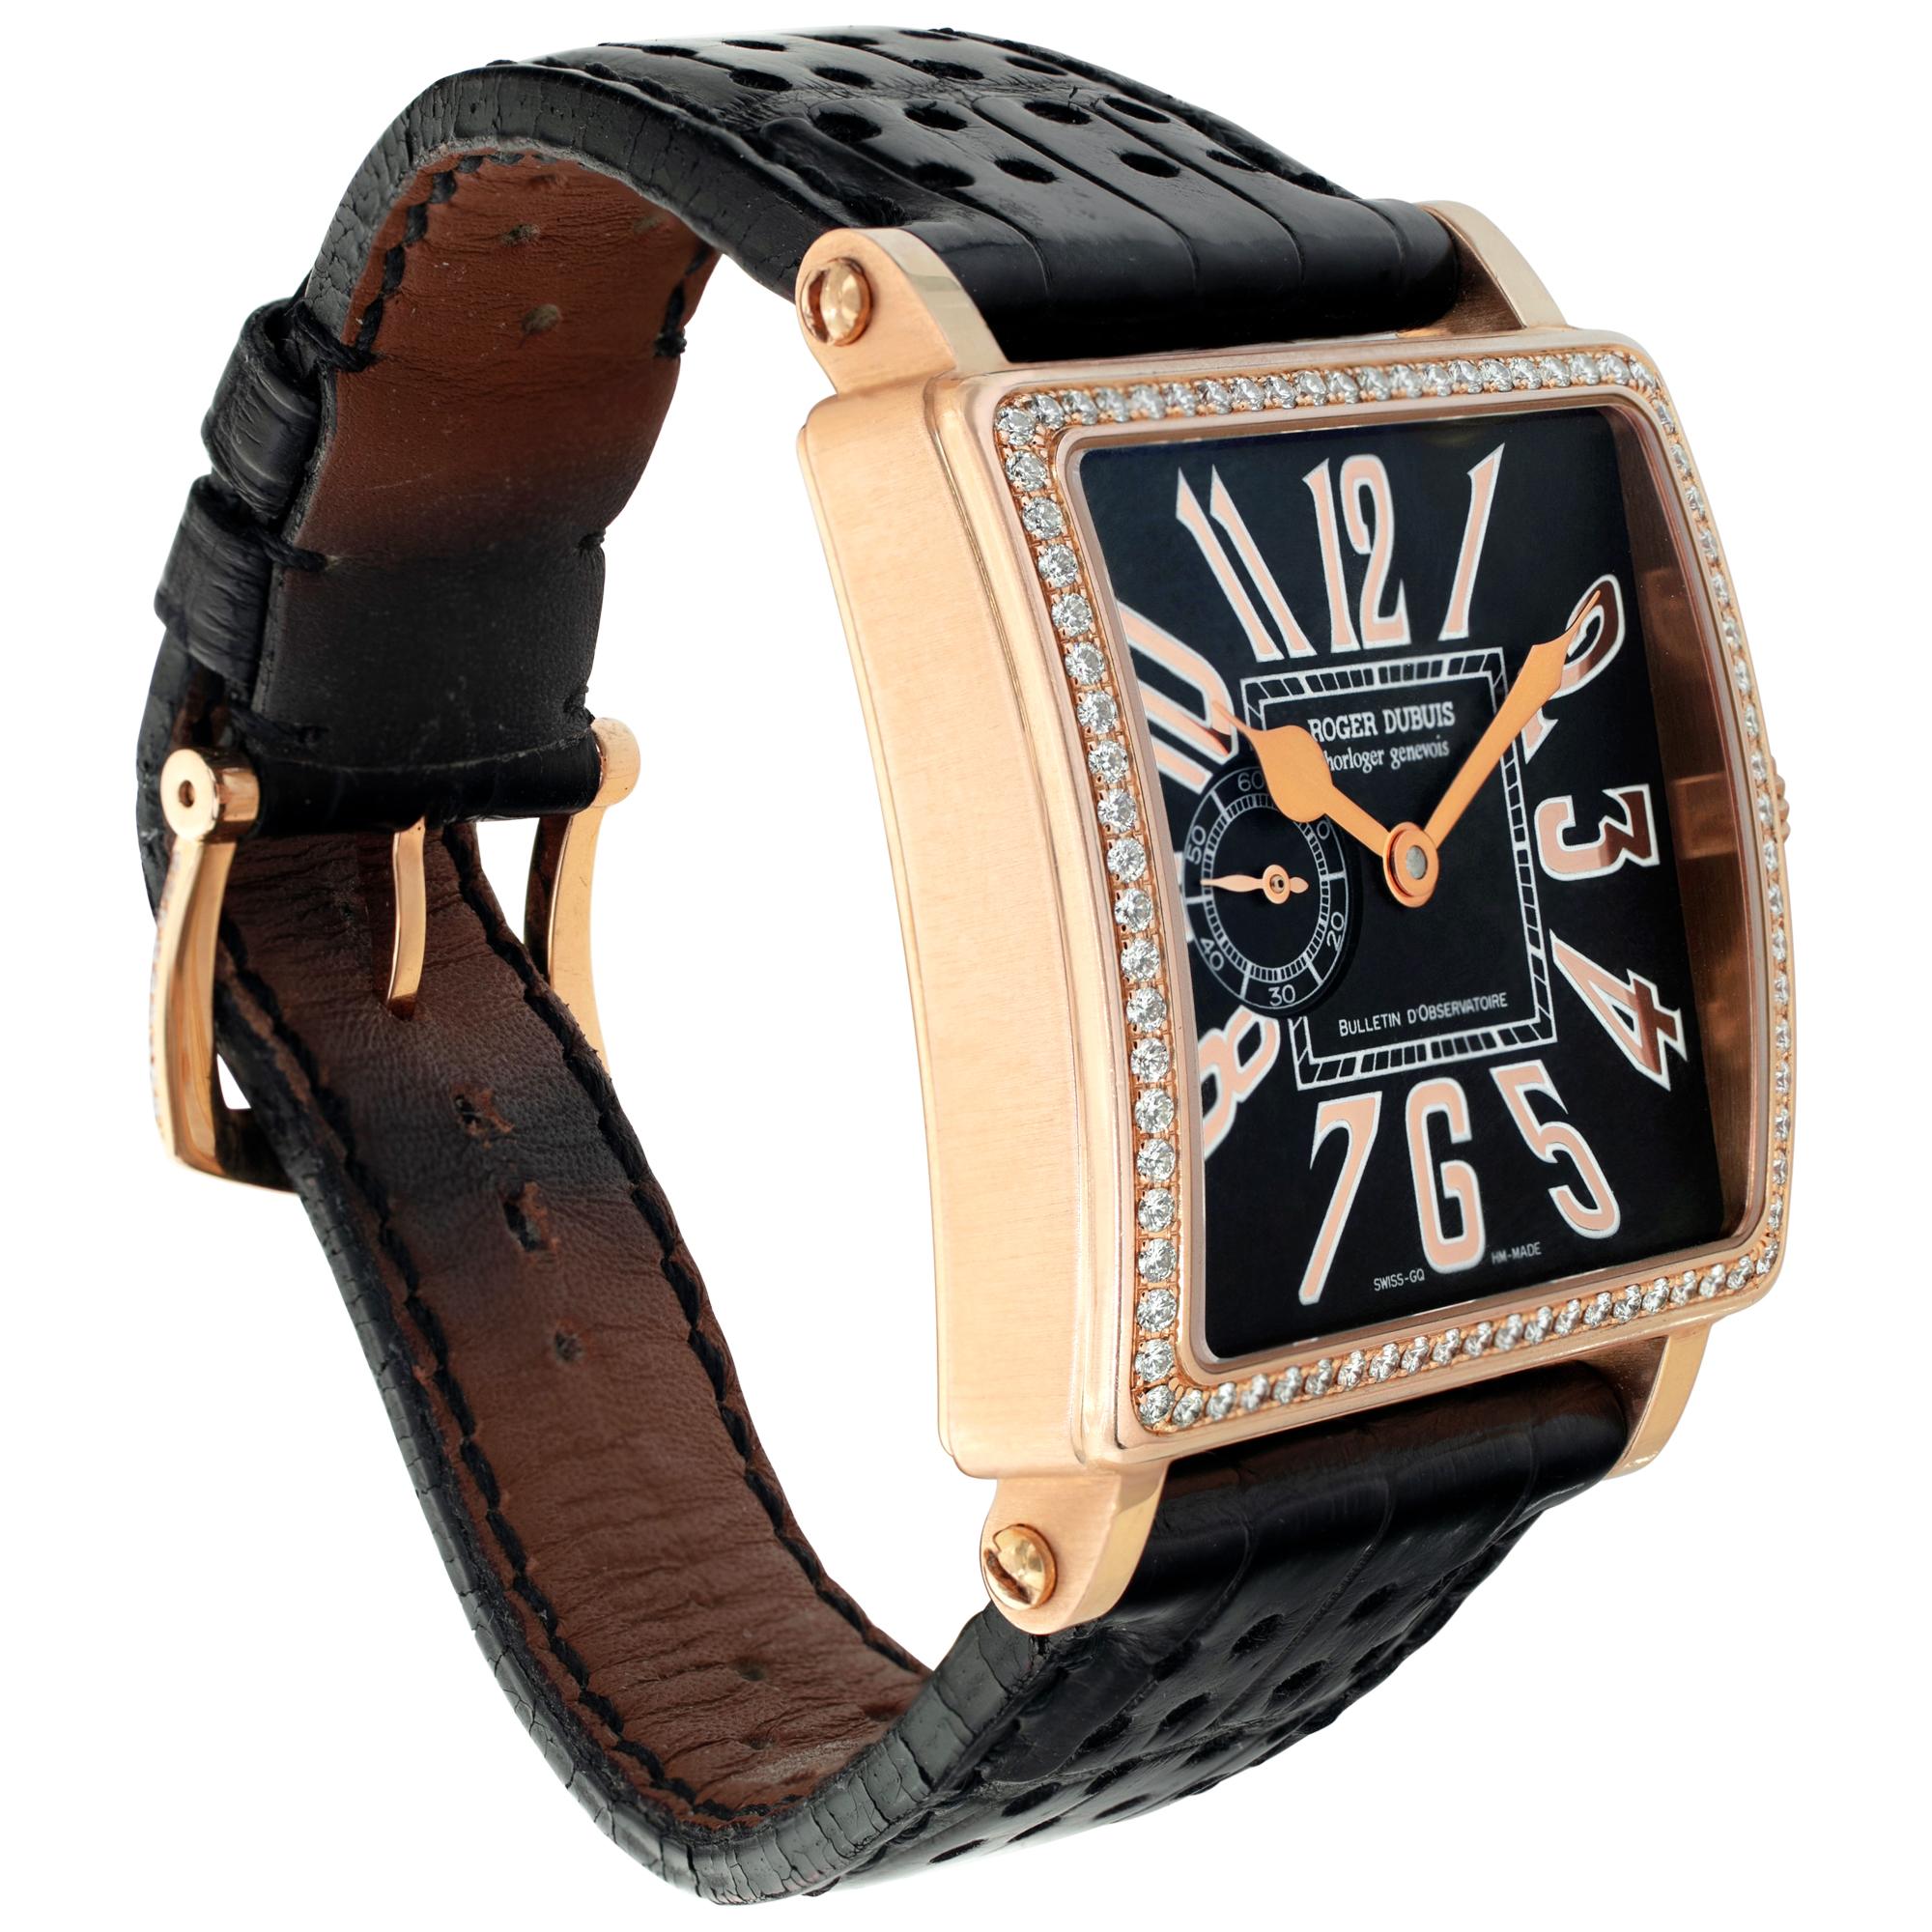 Roger Dubuis Golden Square 18k rose gold Manual Wristwatch Ref G34 98 5-SD In Excellent Condition For Sale In Surfside, FL